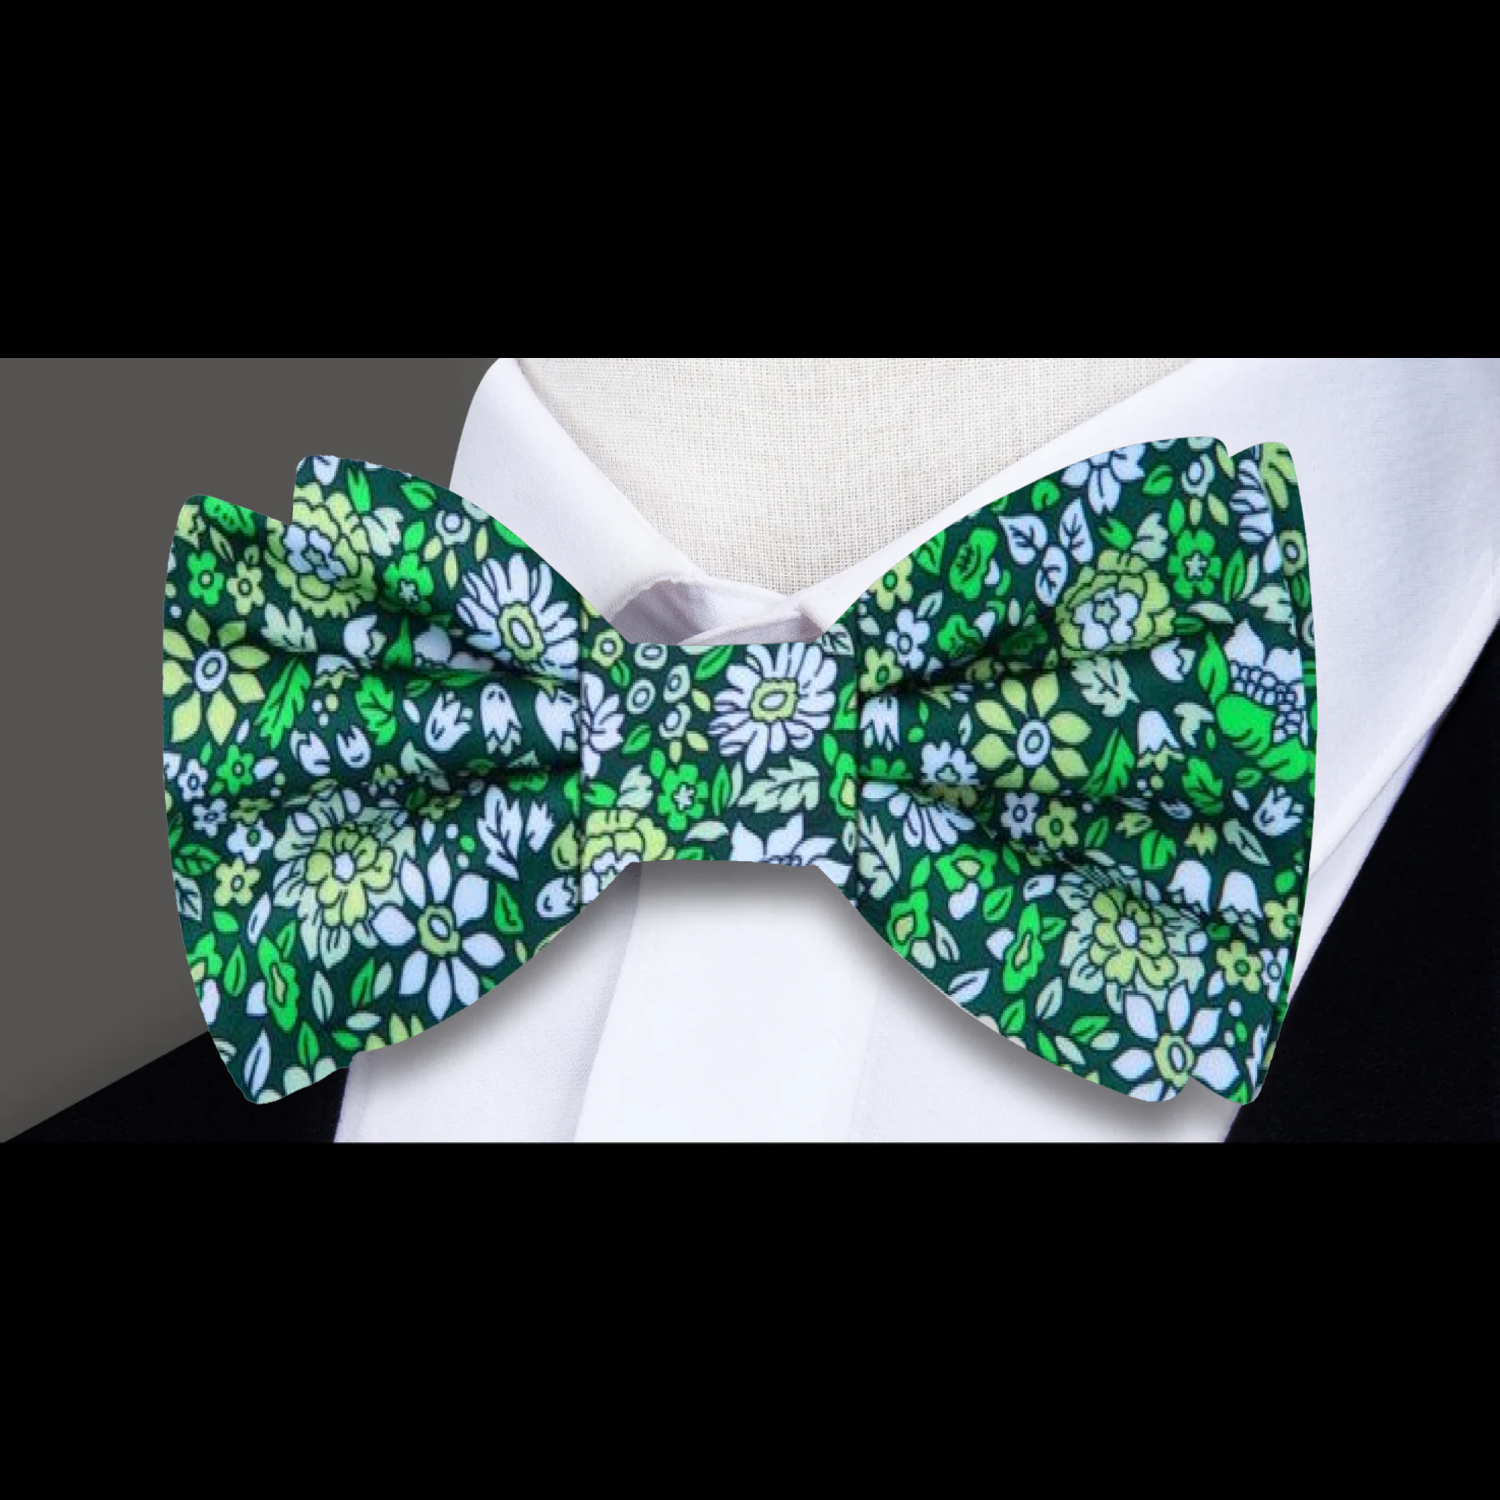 Shades of Green Intricate Floral Bow Tie